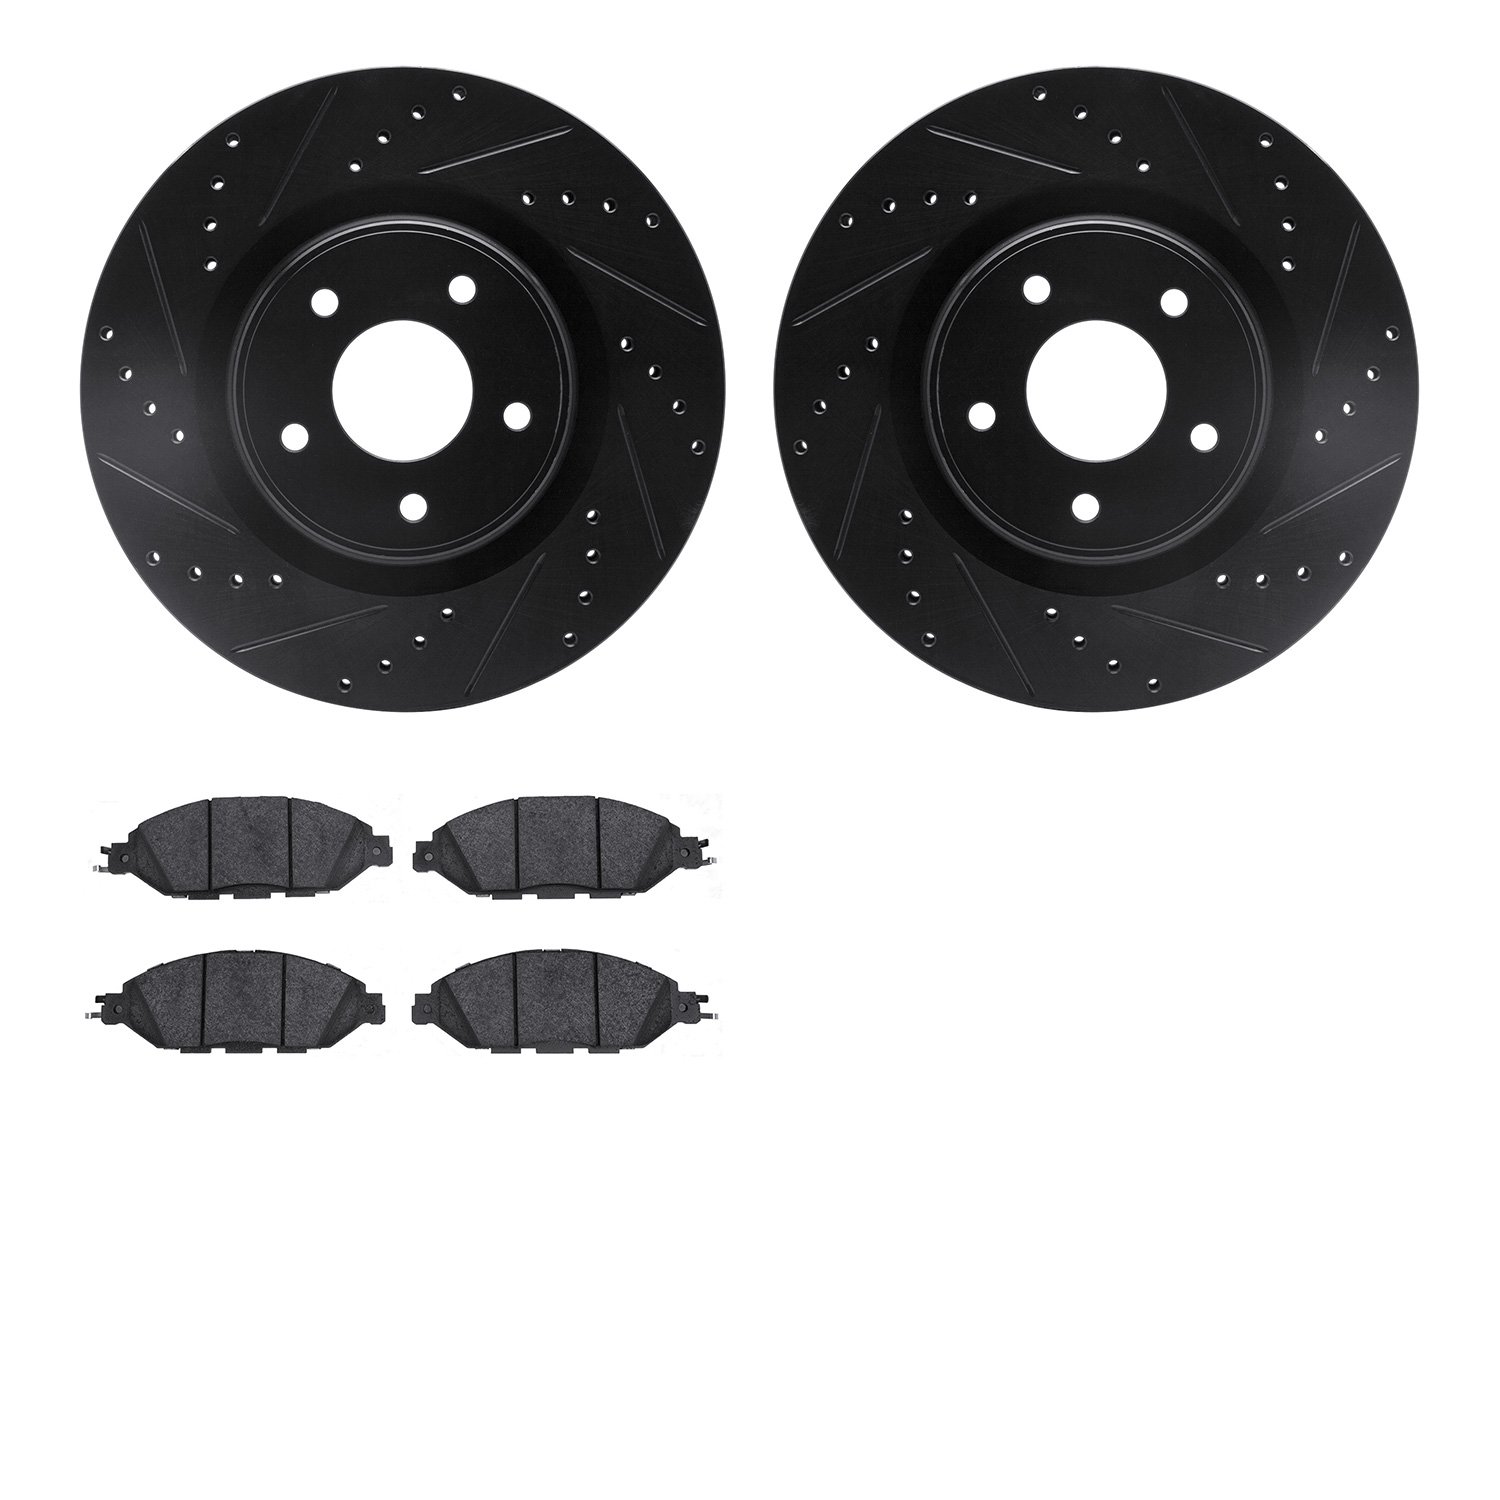 8502-67125 Drilled/Slotted Brake Rotors w/5000 Advanced Brake Pads Kit [Black], Fits Select Infiniti/Nissan, Position: Front